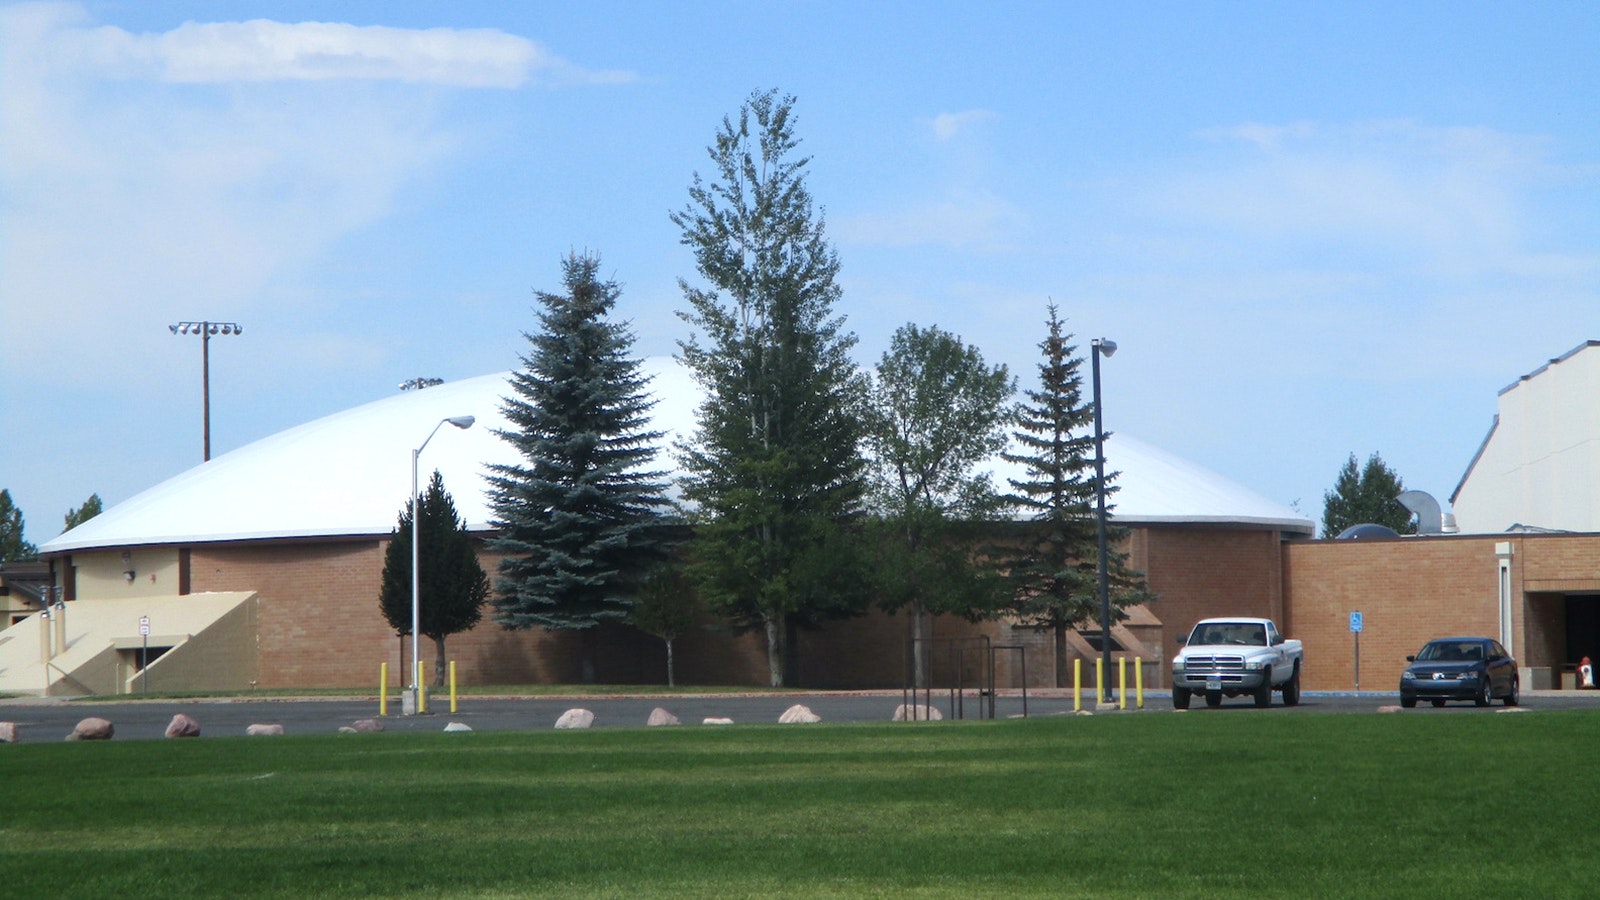 The Dome as seen from outside.